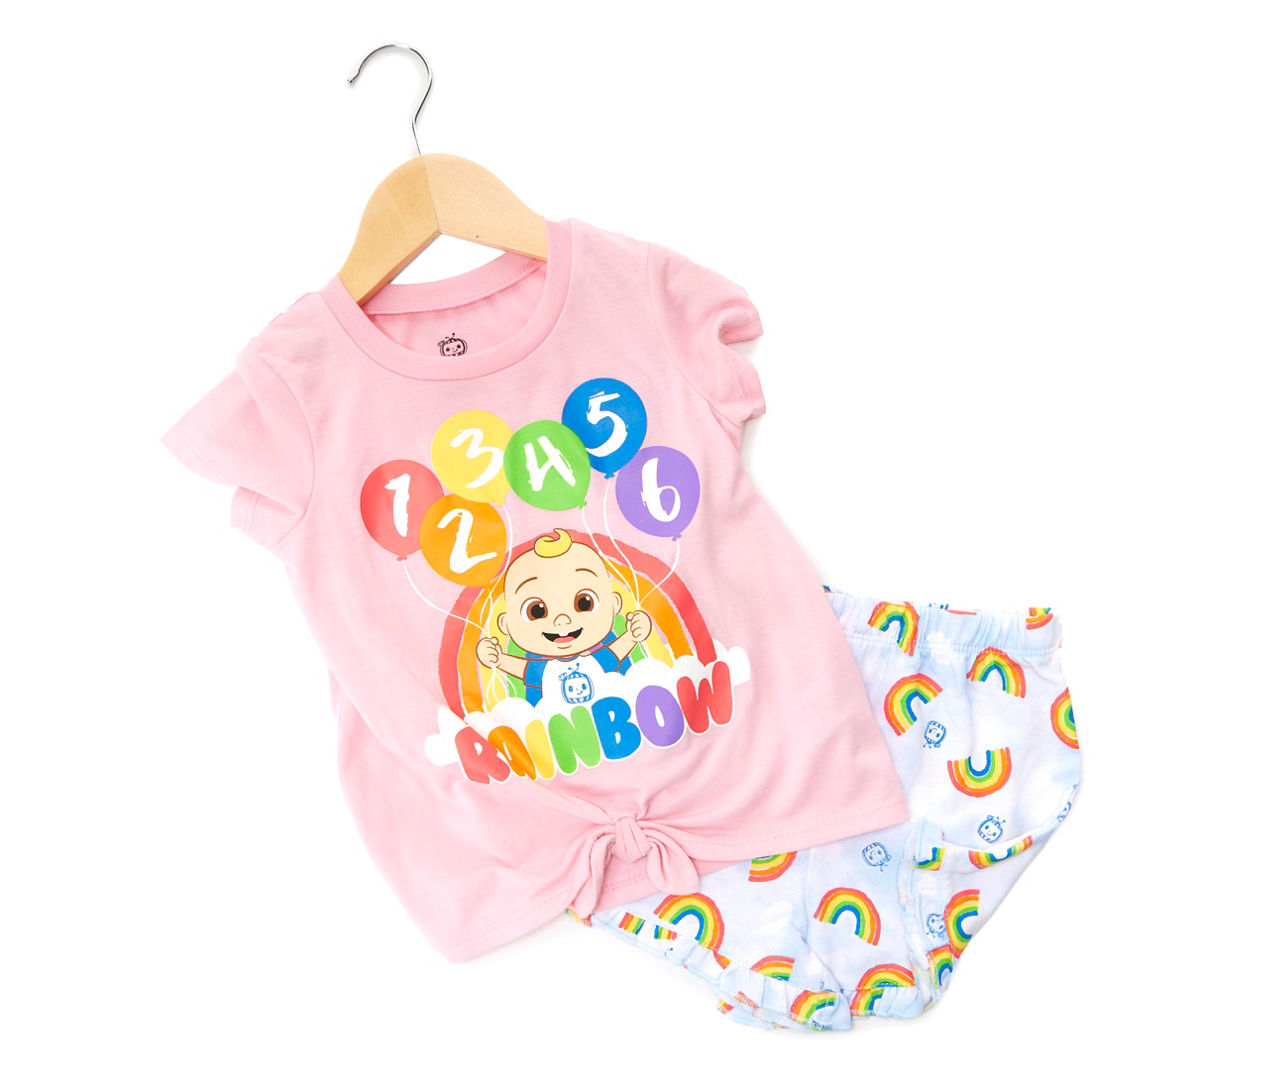 Toddler Size 4T CoComelon "Rainbow" Pink Tee & Blue Cloud Shorts